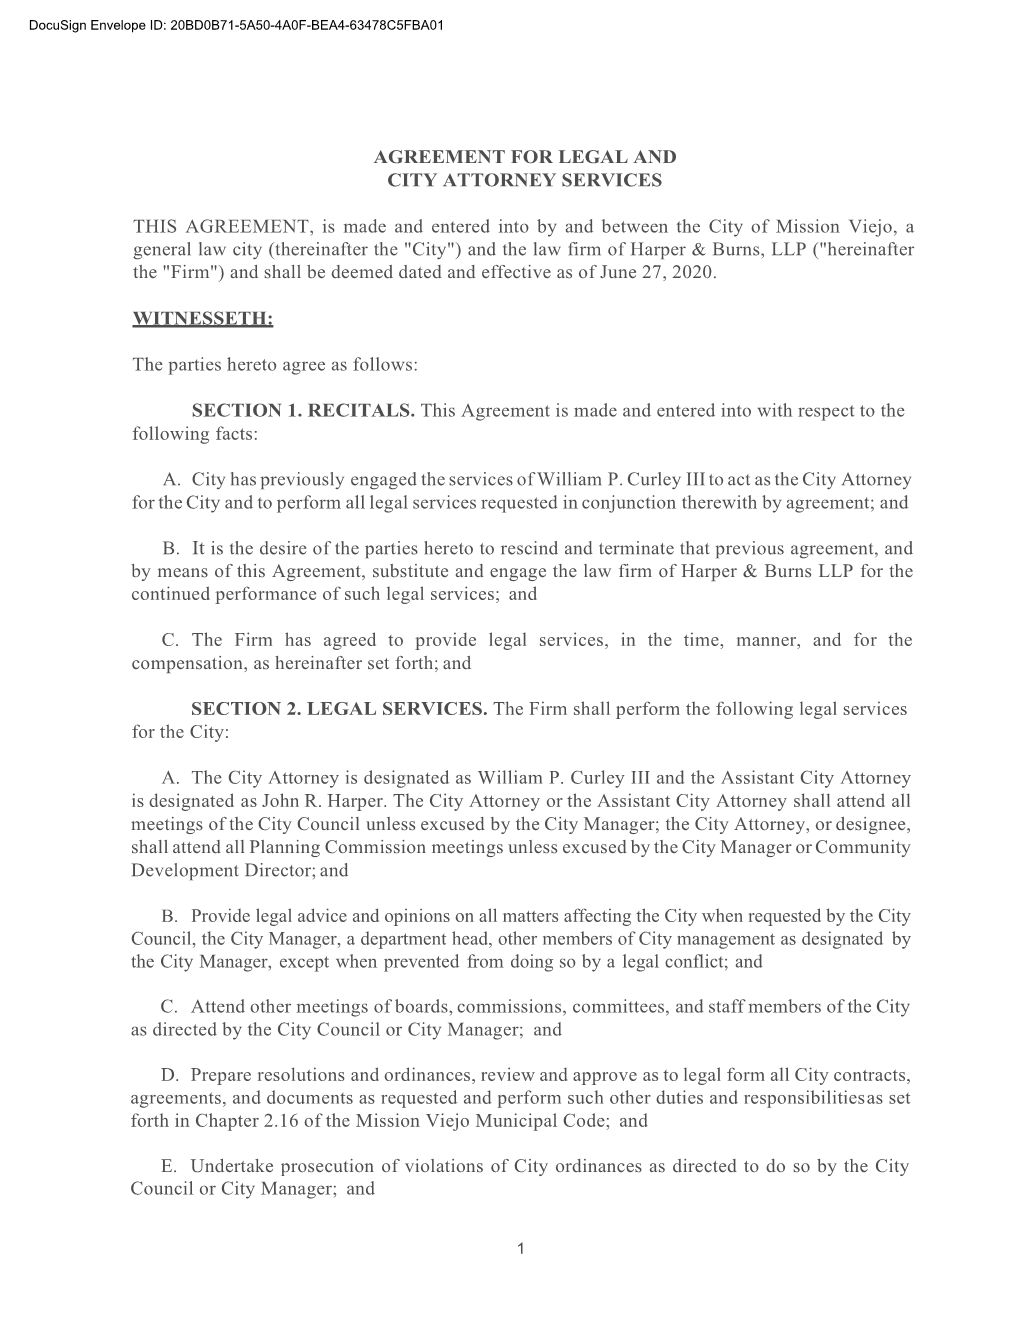 AGREEMENT for LEGAL and CITY ATTORNEY SERVICES THIS AGREEMENT, Is Made and Entered Into by and Between the City of Mission Viejo